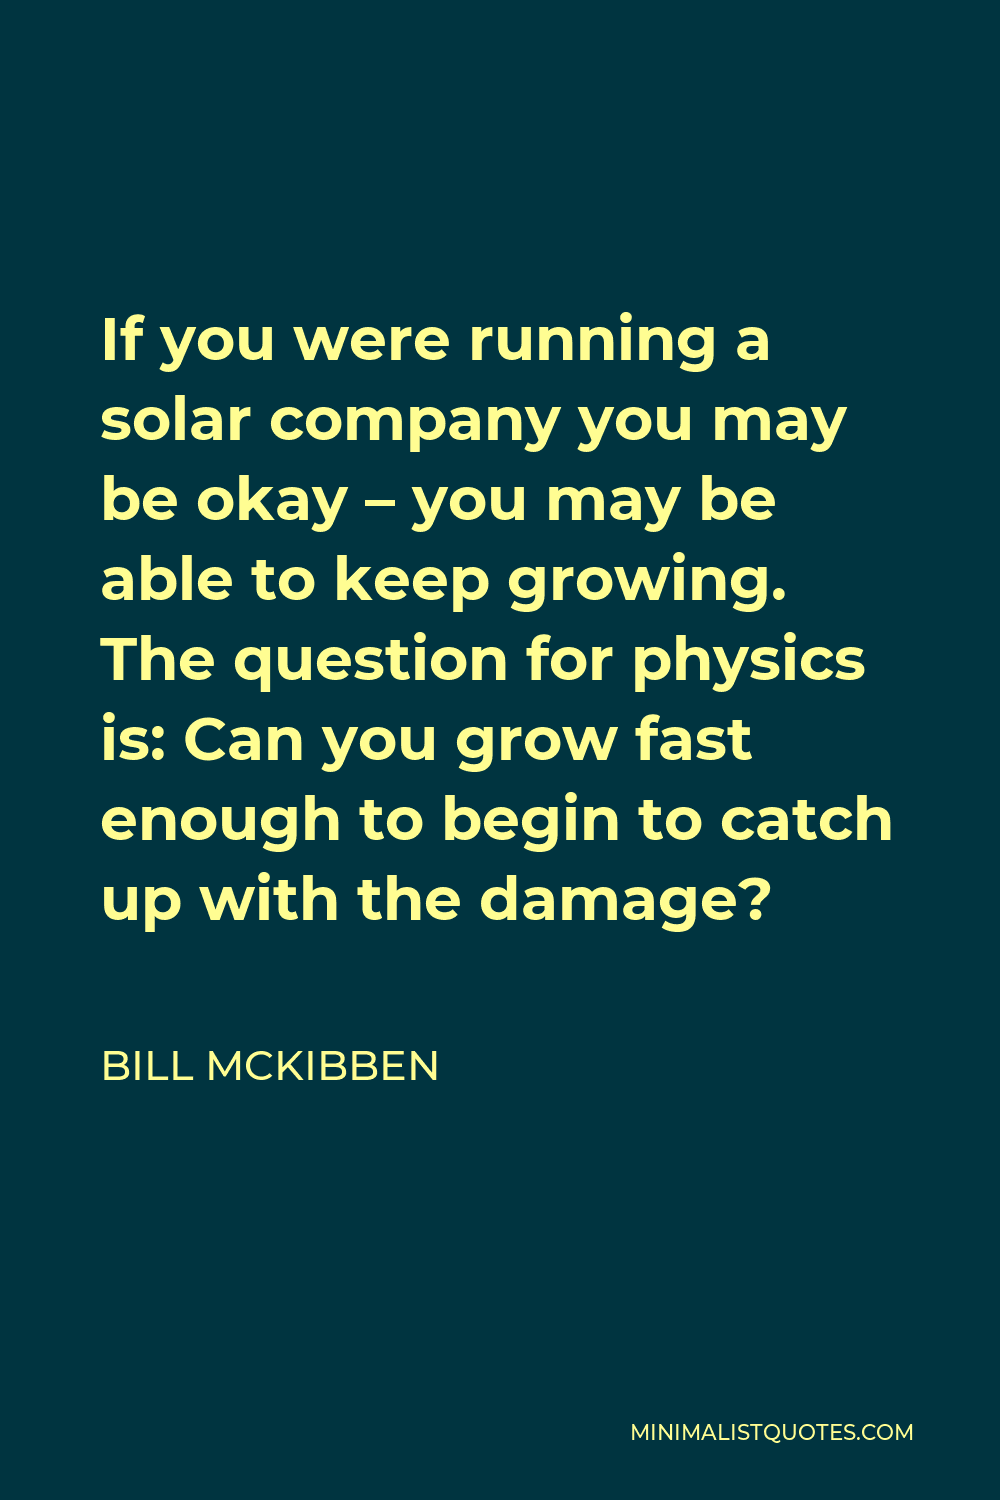 Bill McKibben Quote - If you were running a solar company you may be okay – you may be able to keep growing. The question for physics is: Can you grow fast enough to begin to catch up with the damage?